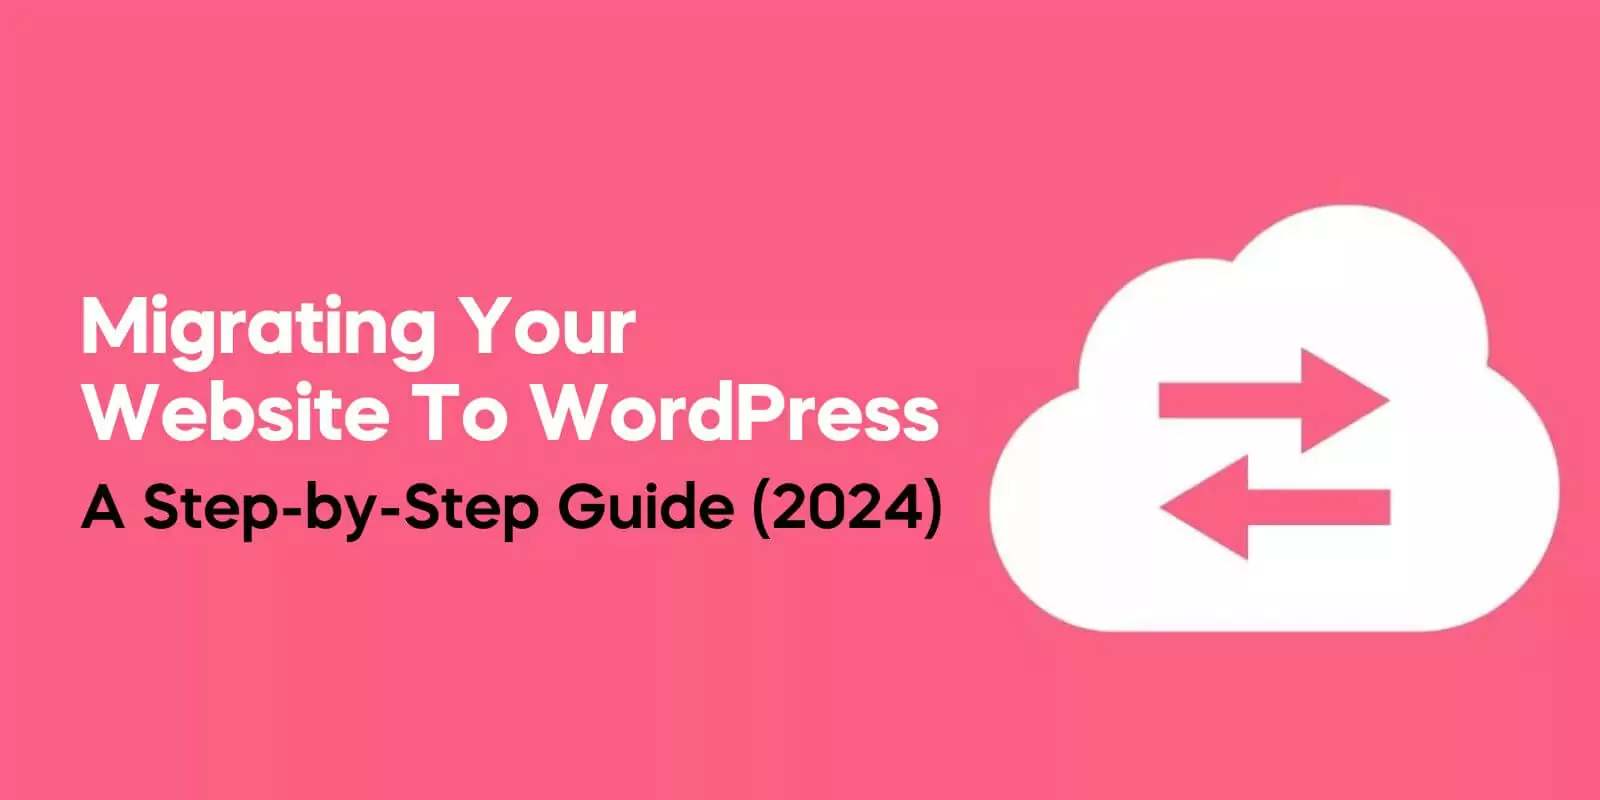 Migrating Your Website to WordPress A Step-by-Step Guide 2024